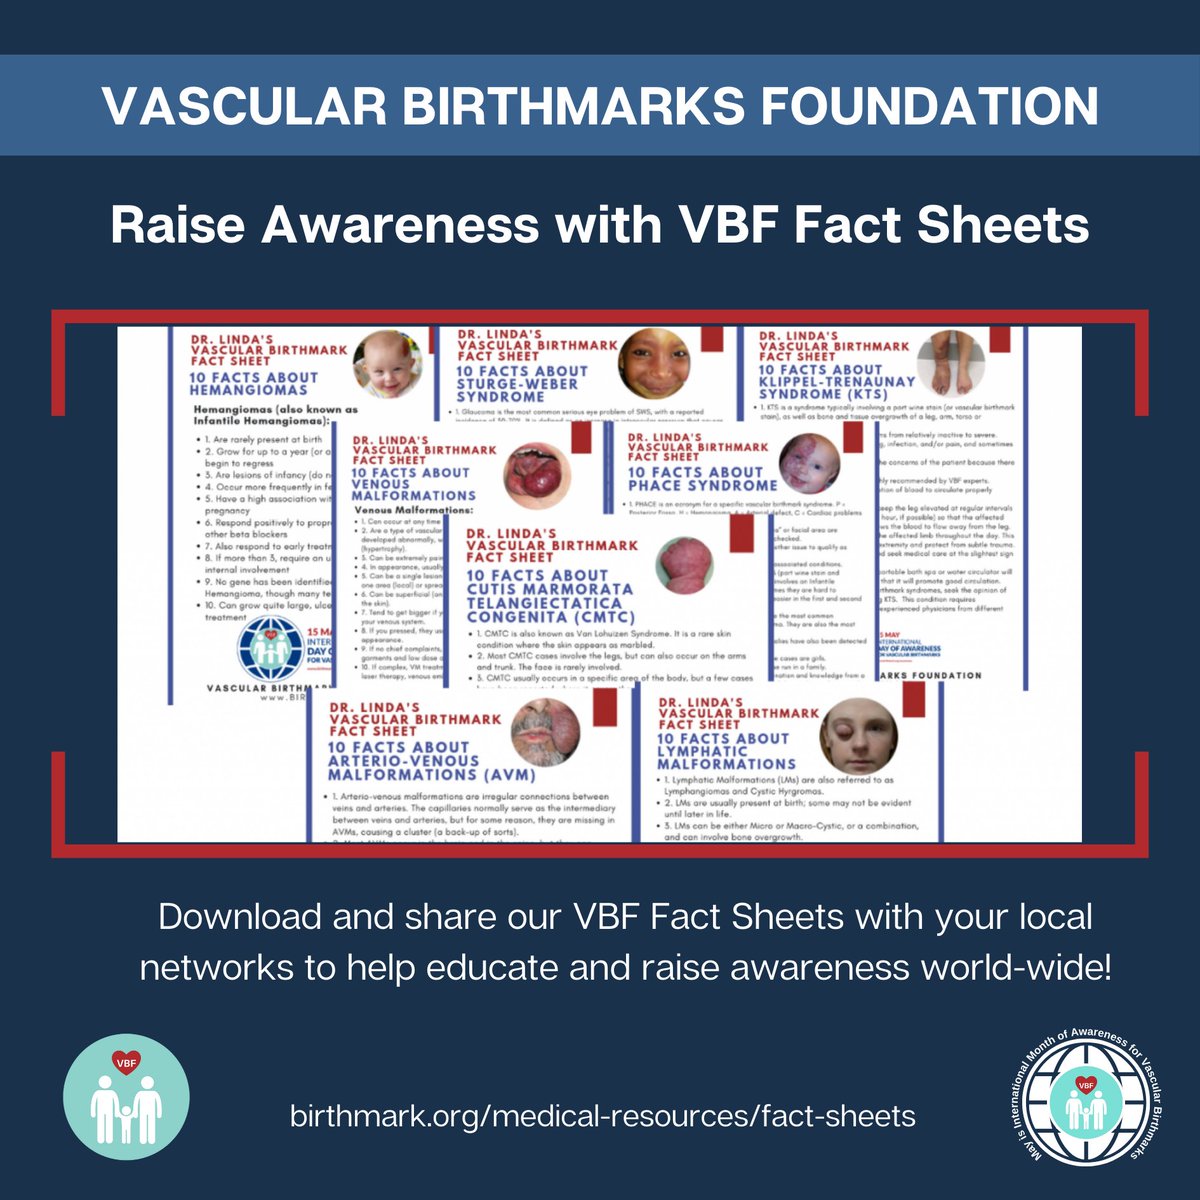 Learn more about #vascularbirthmarks and help the Vascular Birthmarks Foundation (VBF) spread awareness during the VBF International Month of Awareness for all Vascular Birthmarks, Anomalies, and/or Related Syndromes (VBARS)! birthmark.org/medical-resour…